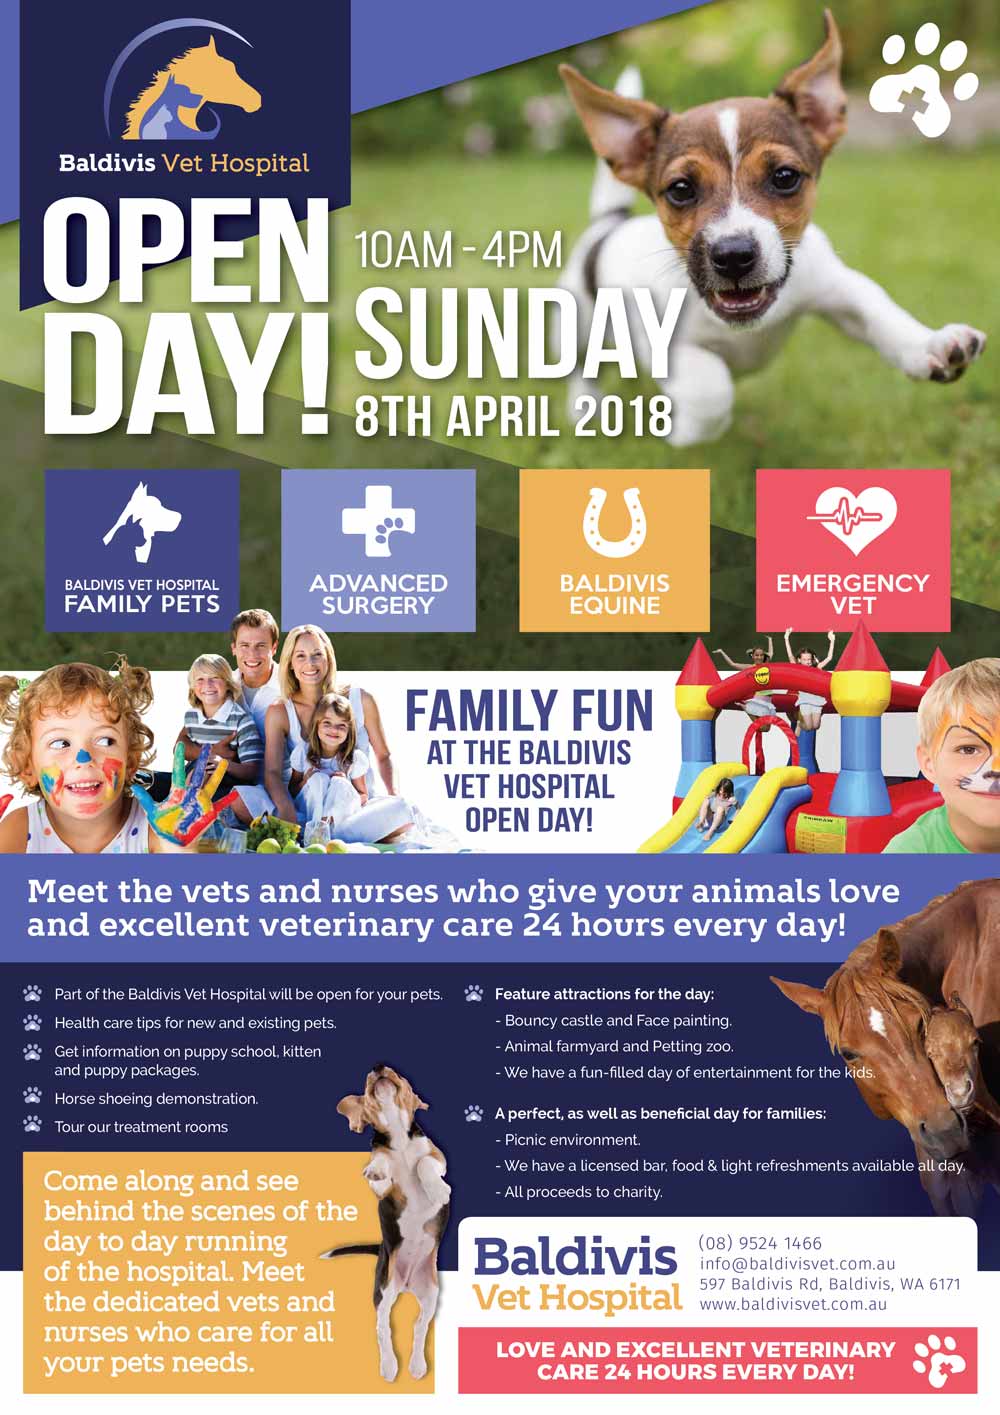 bvh-open-day-flyer-8th-april-2018-front